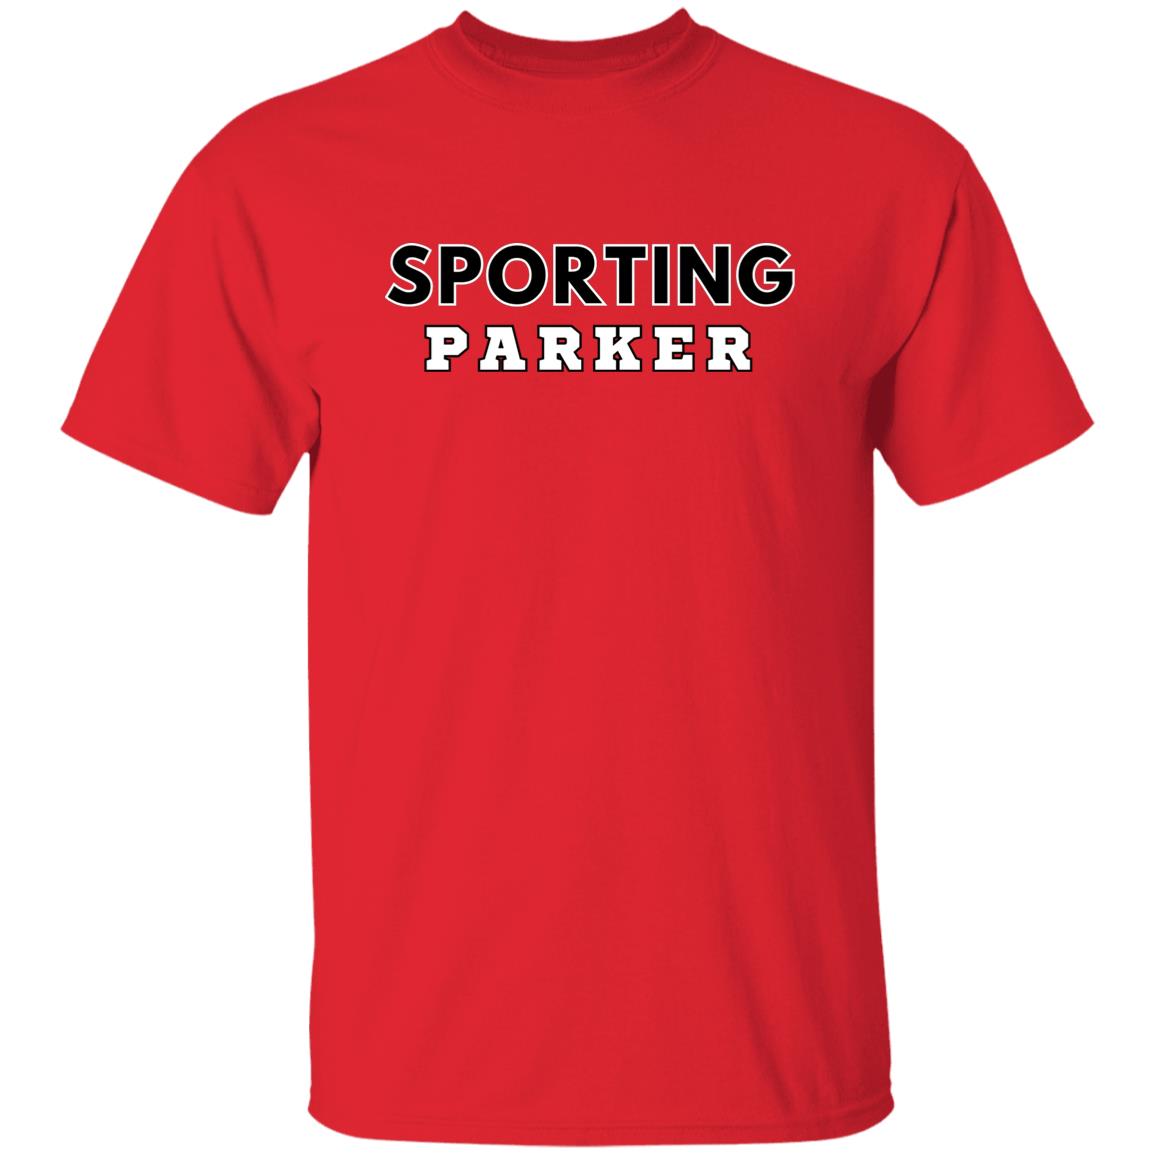 Red Sporting Parker Adult T-Shirt